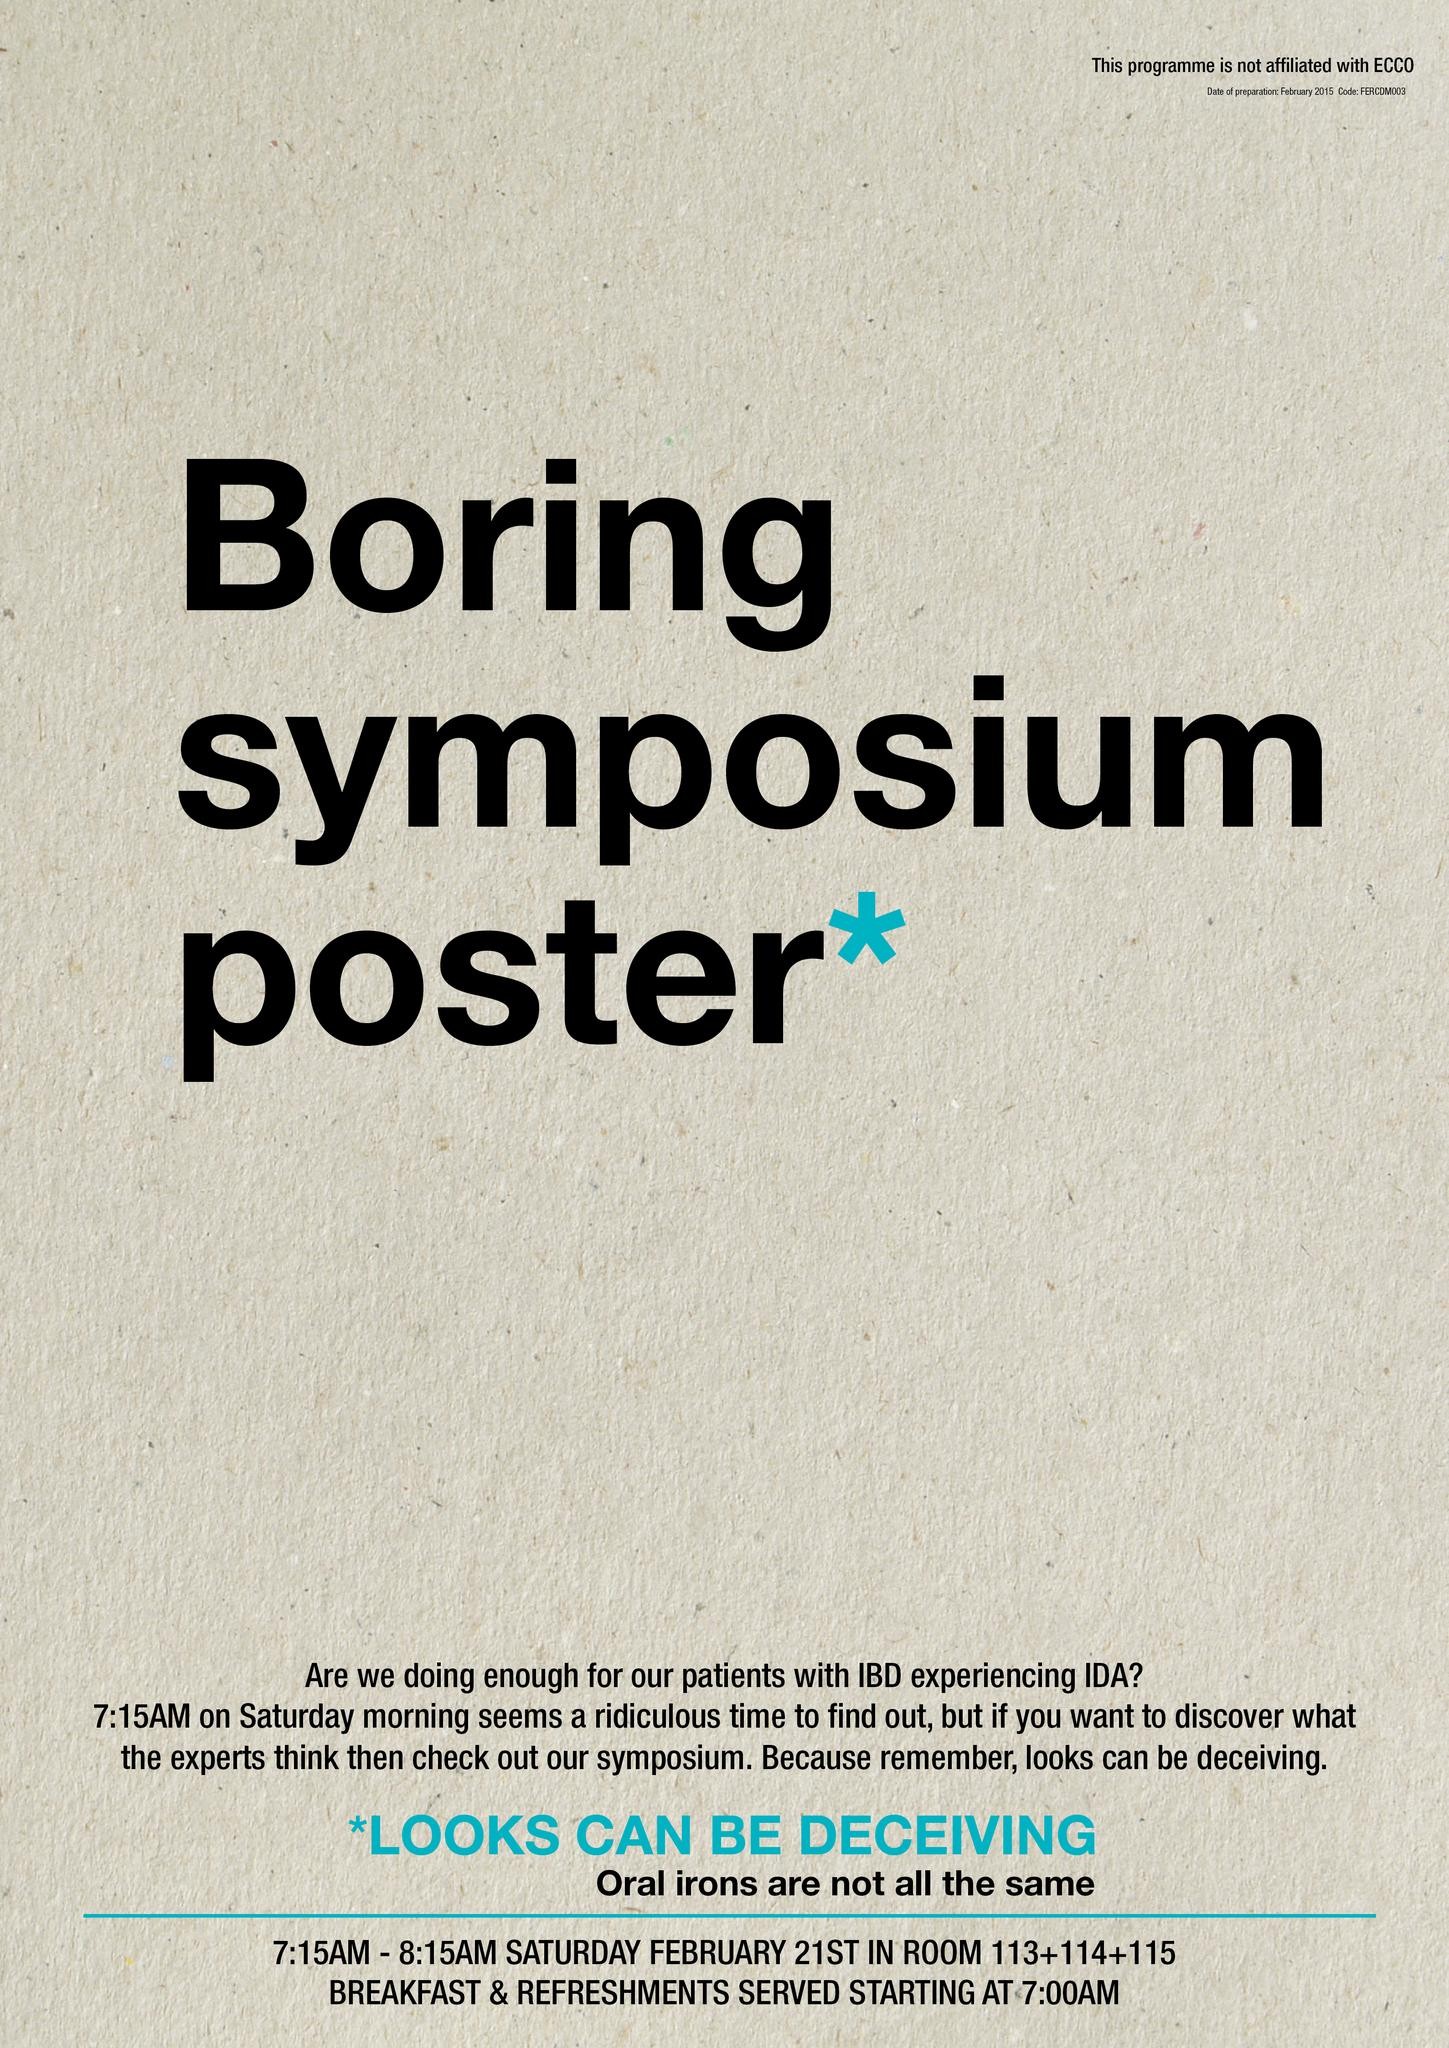 LOOKS CAN BE DECEIVING/BORING SYMPOSIUM